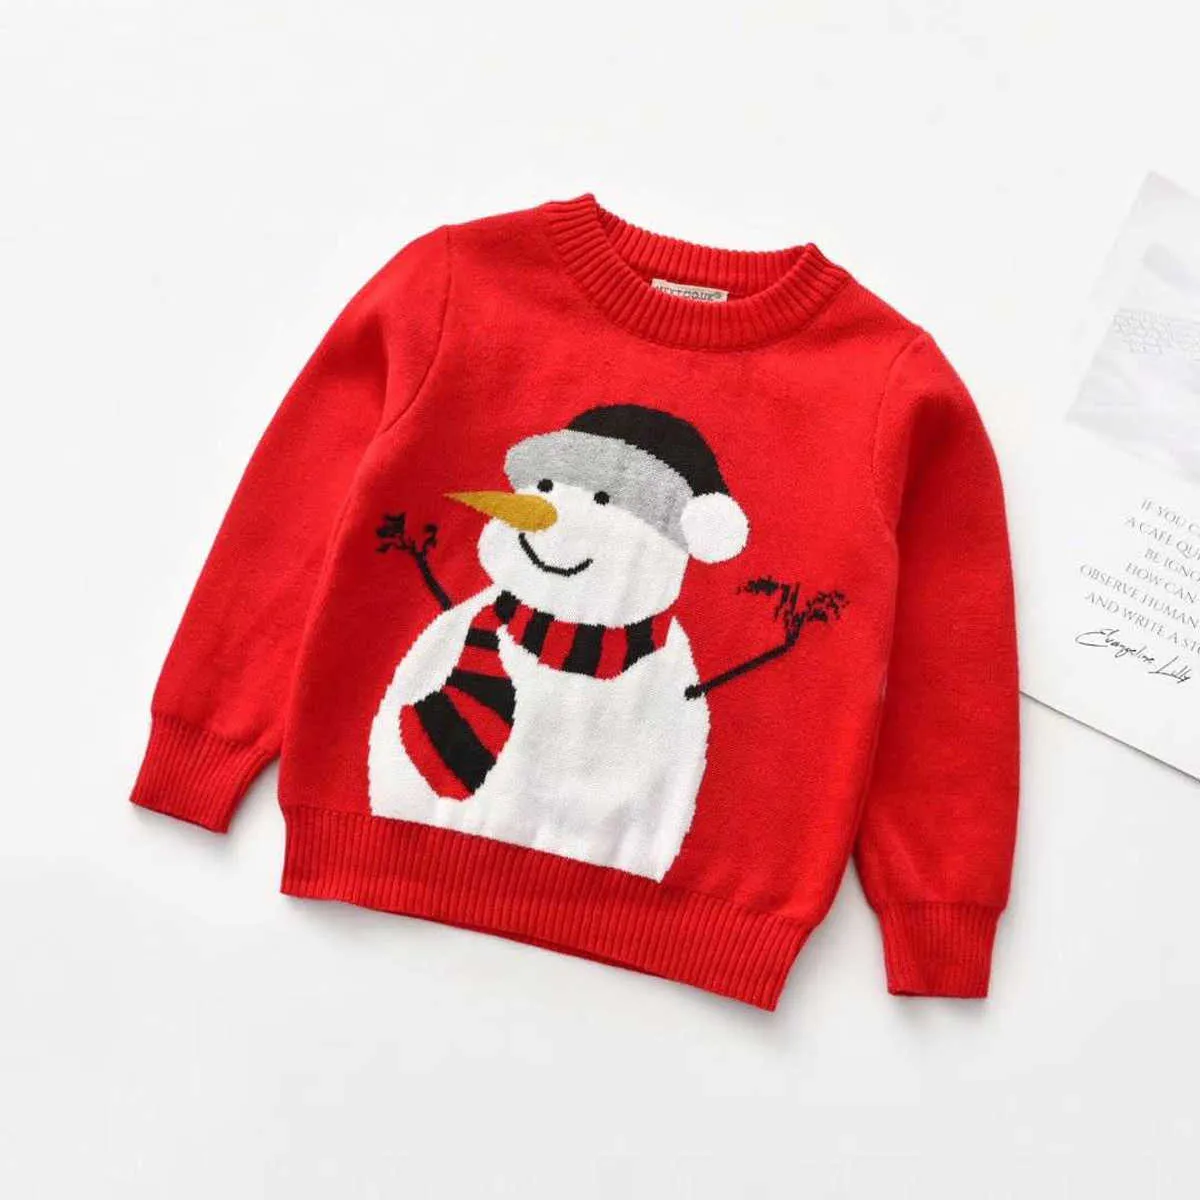 Toddler Baby Girls Boys Christmas Sweaters, Little Kids Cute Snowman Reindeer Print Long Sleeve Crew Neck Knitted Pullovers Y1024